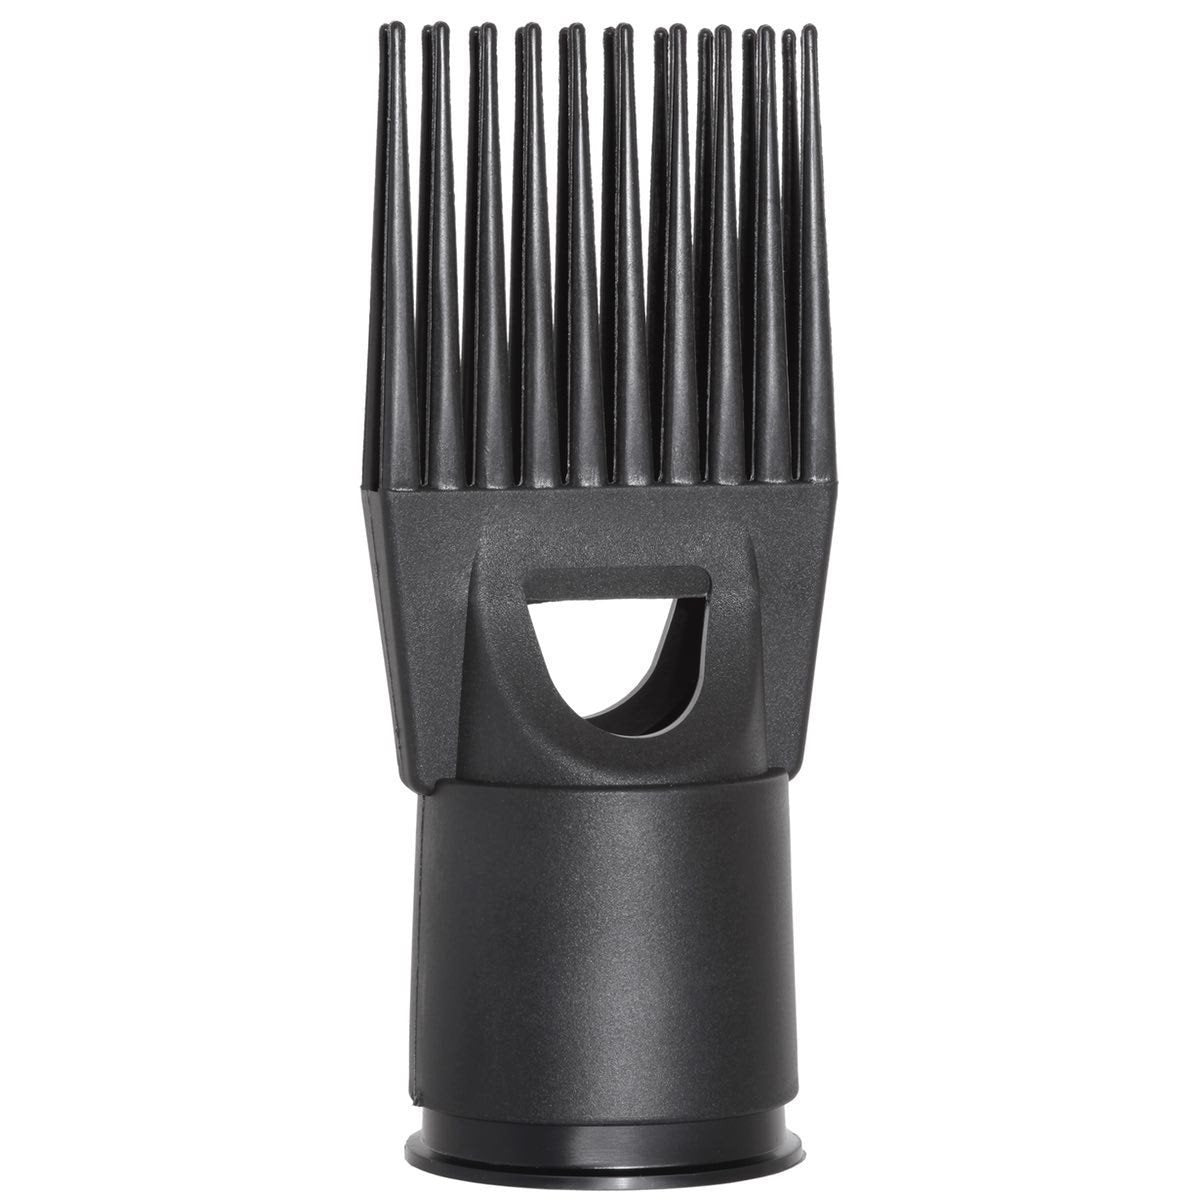 ghd Hair Dryer Accessories  ghd Hair Dryer Diffusers and Comb Attachments   ghd Official